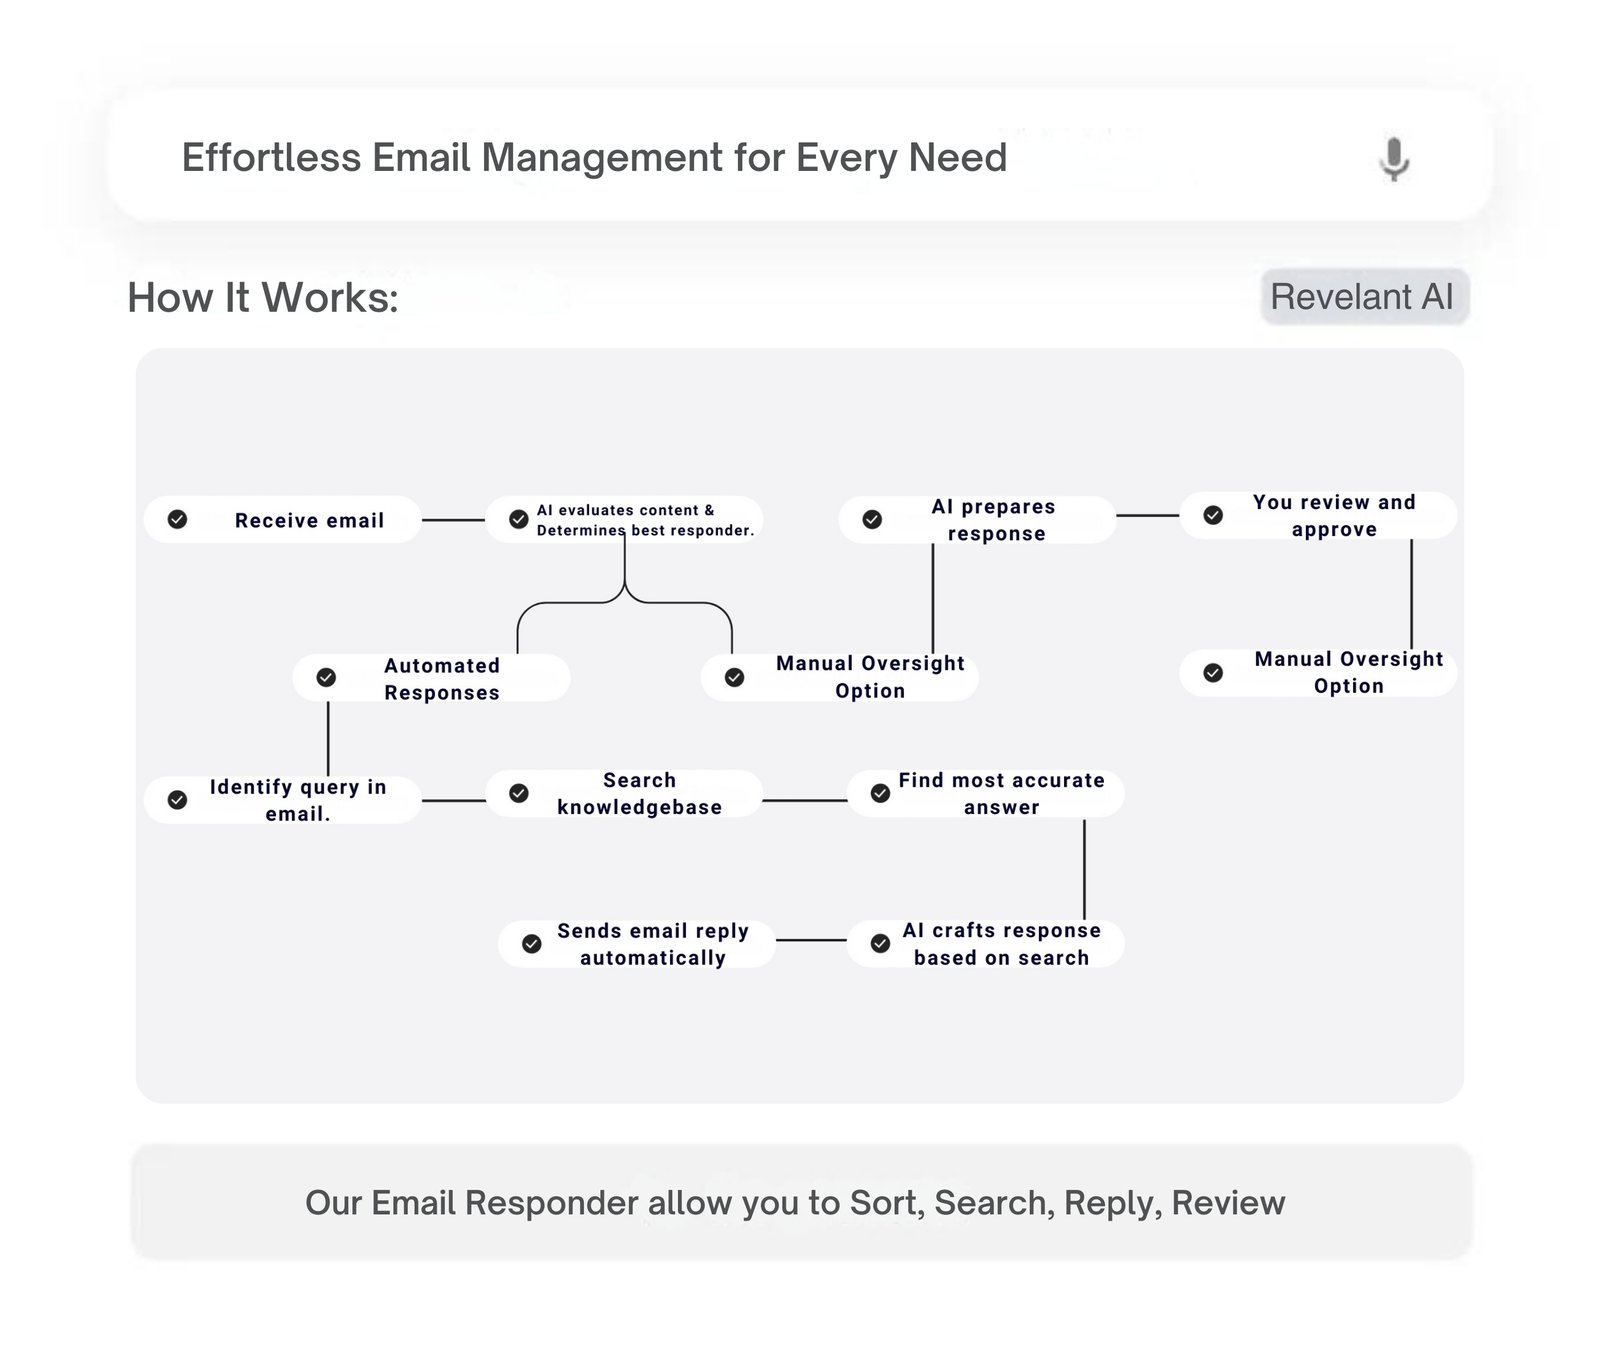 Flowchart of an automatic email responder system, showing the process from receiving emails to AI-driven responses and manual oversight options